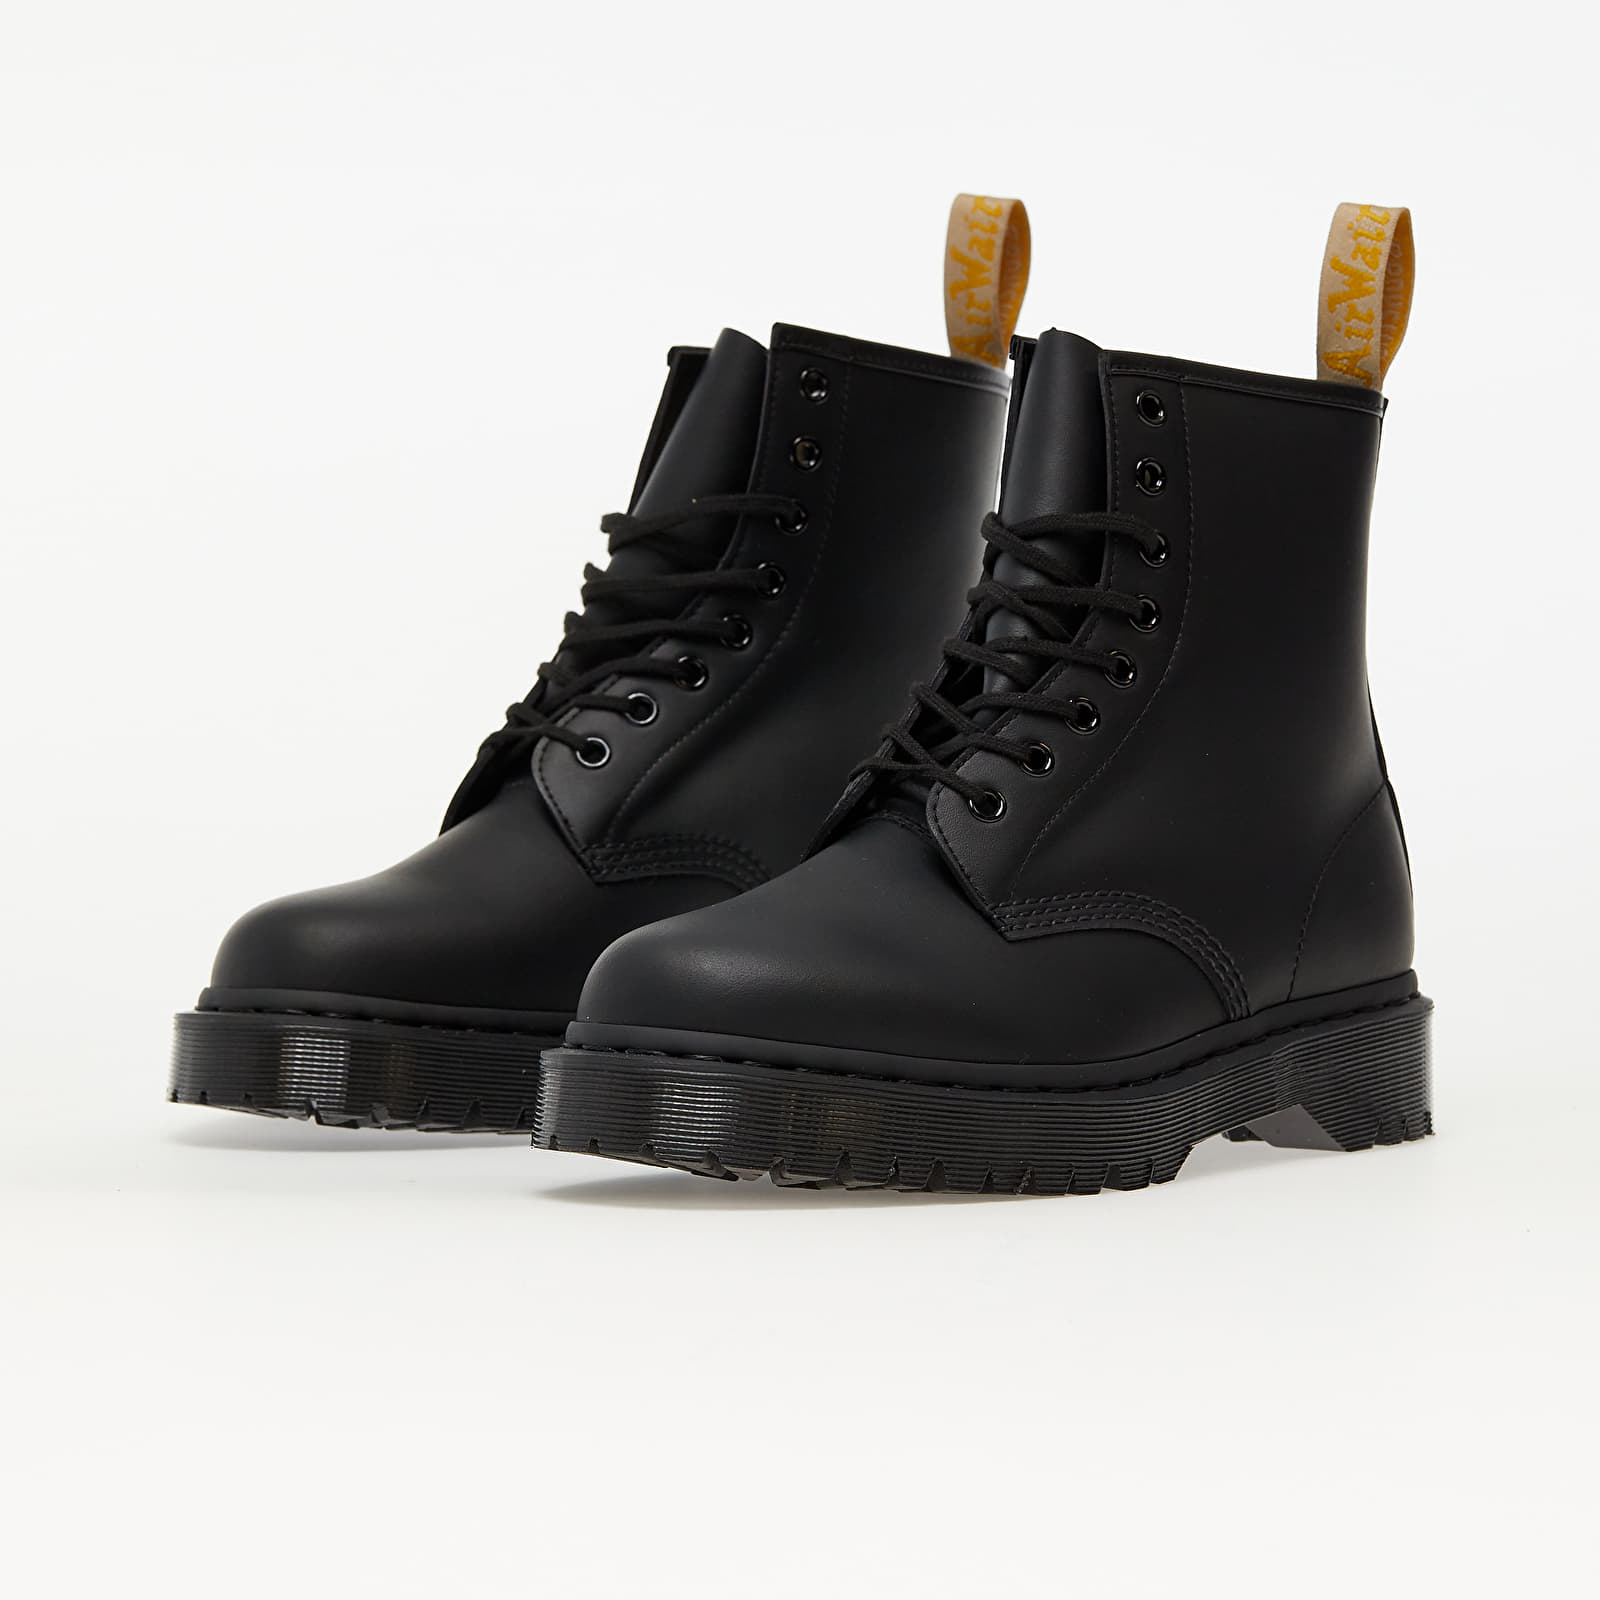 Stylish and Cruelty-Free: Explore Dr. Martens Vegan Collection